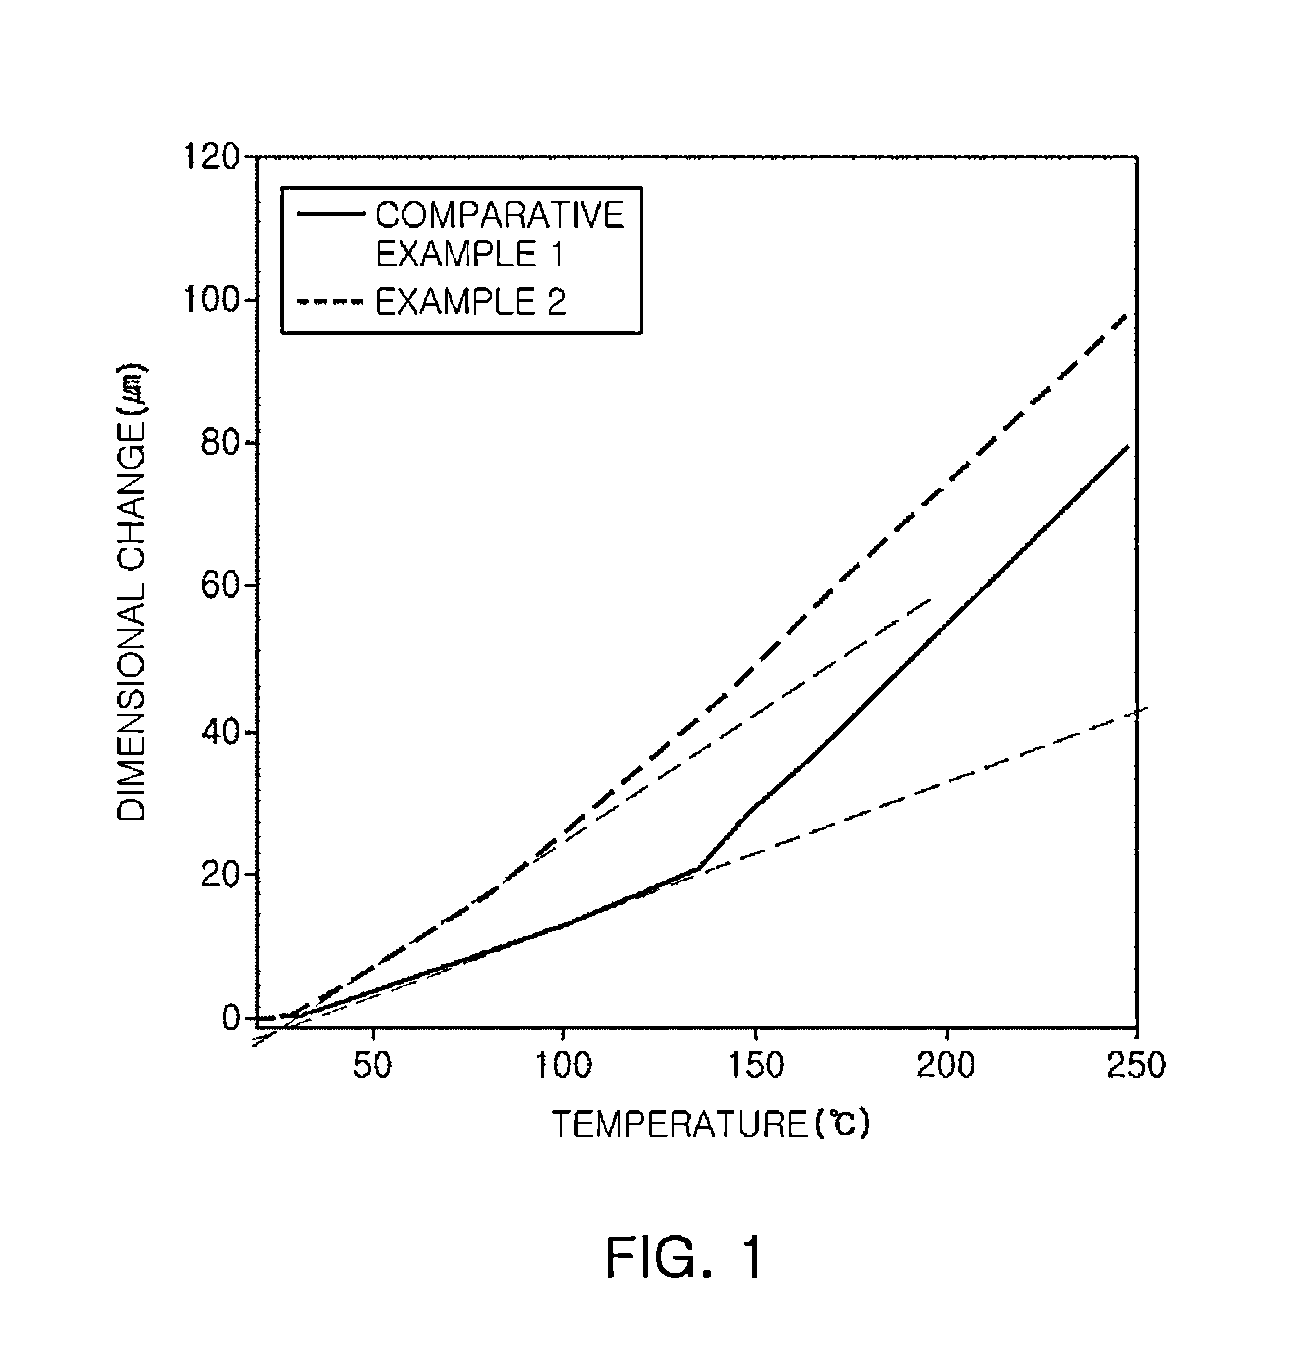 Epoxy compound having alkoxysilyl group, method of preparing the same, composition and cured product comprising the same, and uses thereof